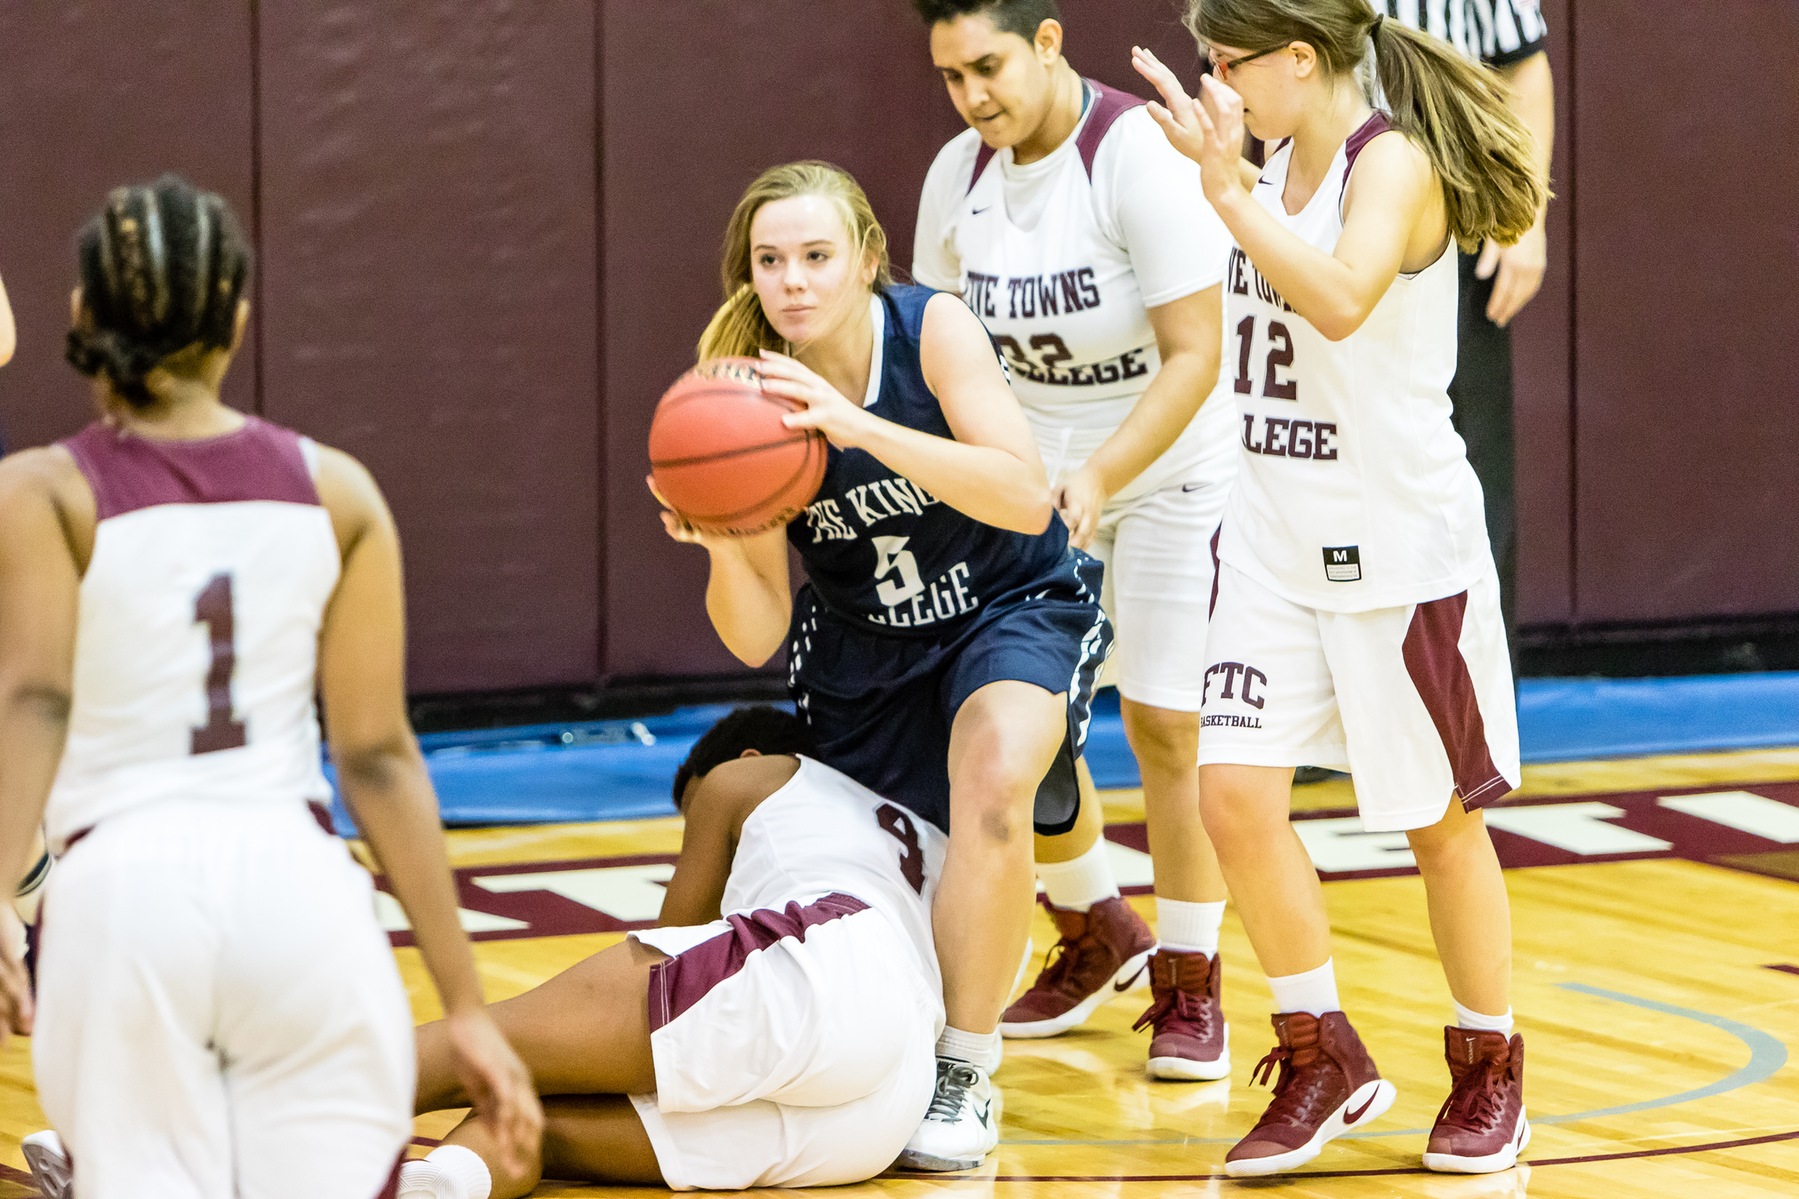 Women's Basketball Outlasted by Vaughn